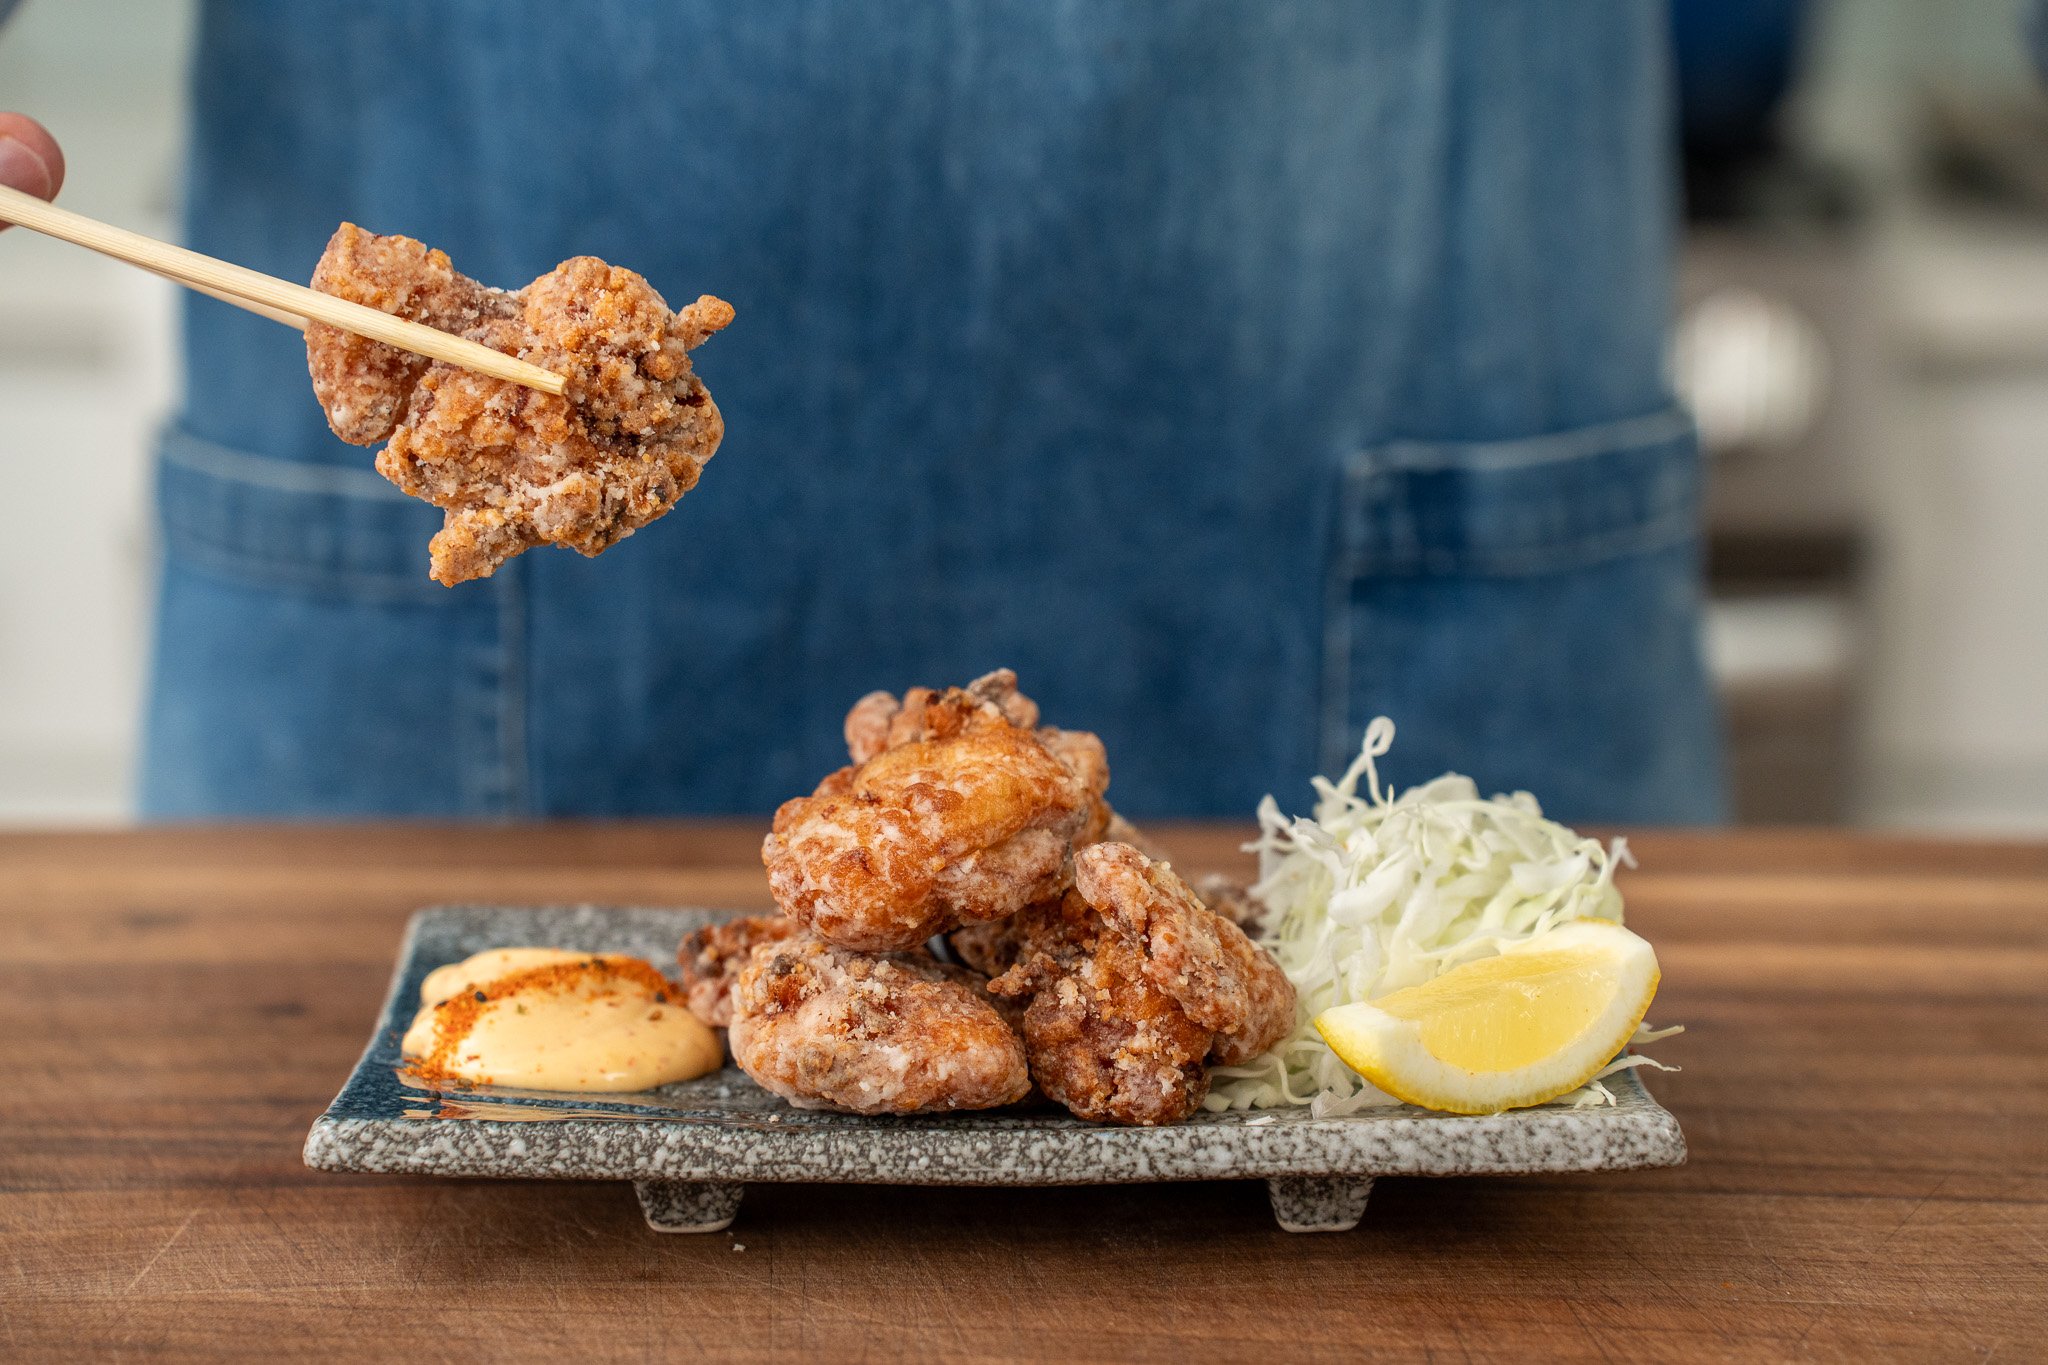 Is the fried chicken from Japan the best I've ever had? That's a hard MAYBE! Japanese Fried Chicken aka Karaage is light (for fried chicken), insanely crispy, and is truly one of the most pleasurable things you can put in a human mouth. I've got a gr